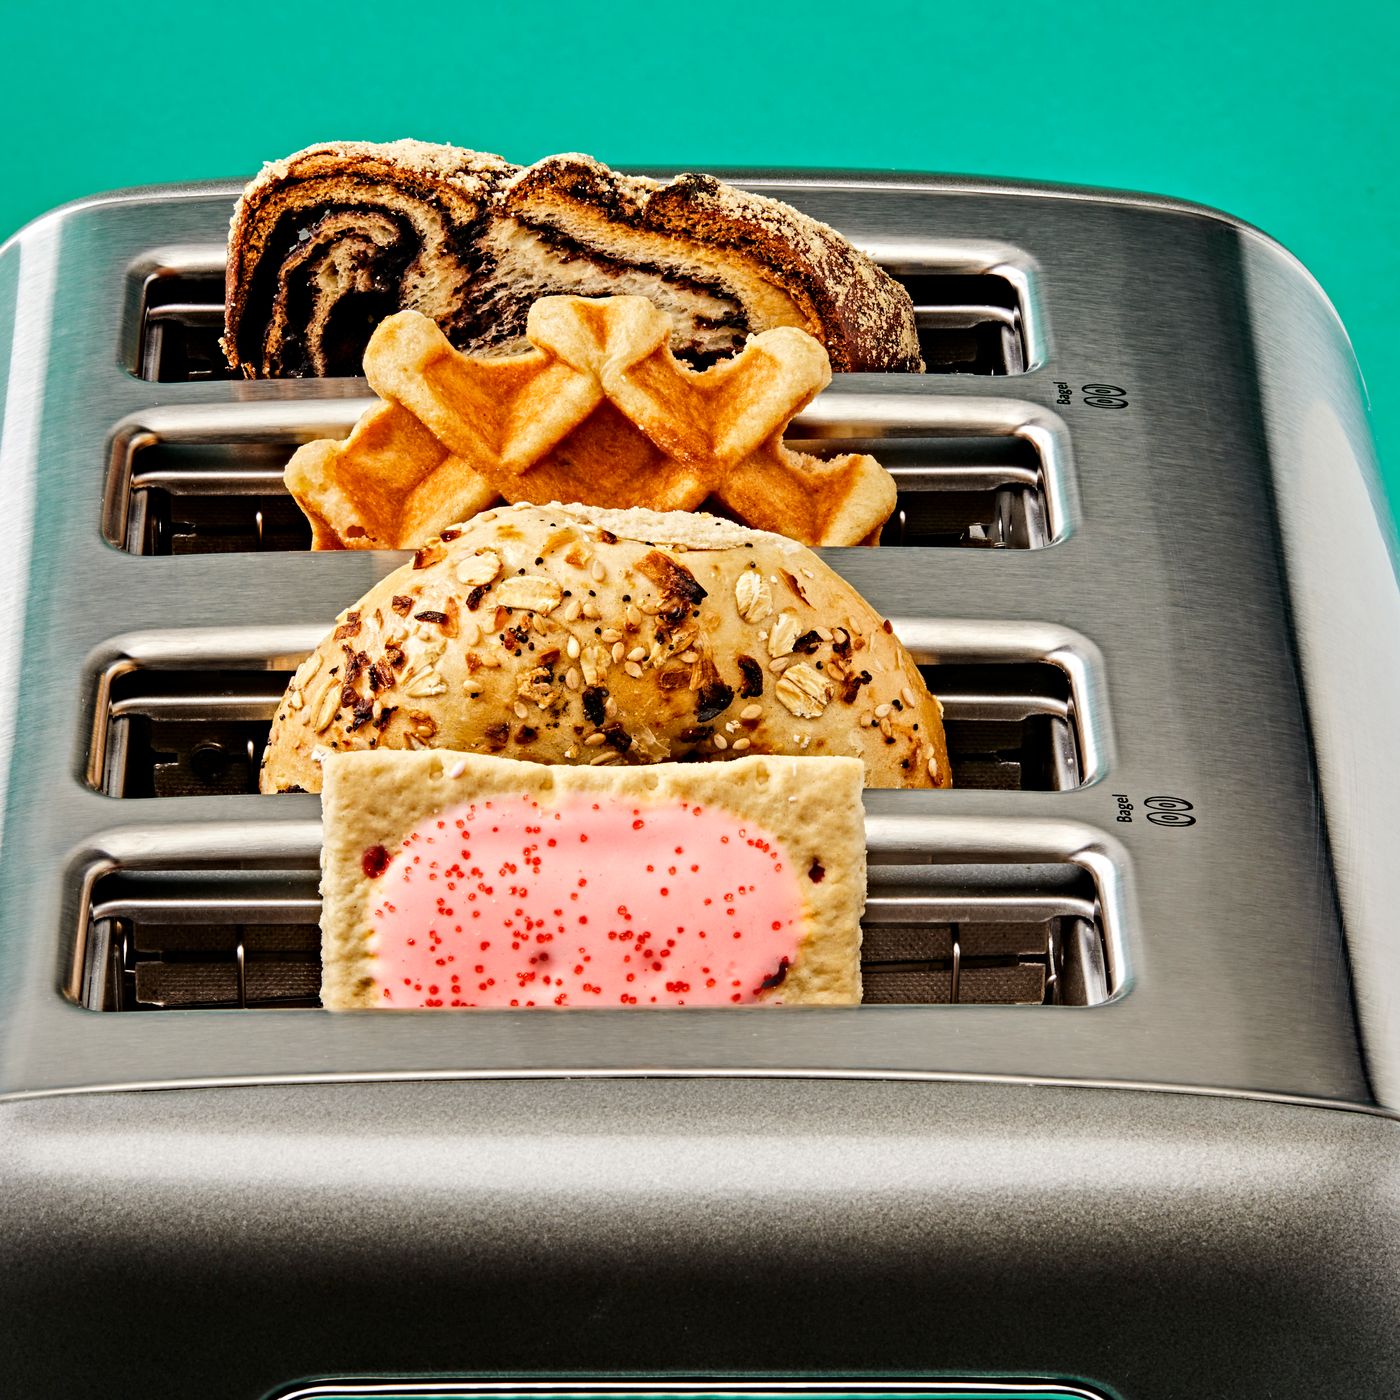 https://pyxis.nymag.com/v1/imgs/72f/1c0/2bd57754a1be1d35d0e3a6625a7dcb0556-toaster-stack-final.1x.rsquare.w1400.jpg